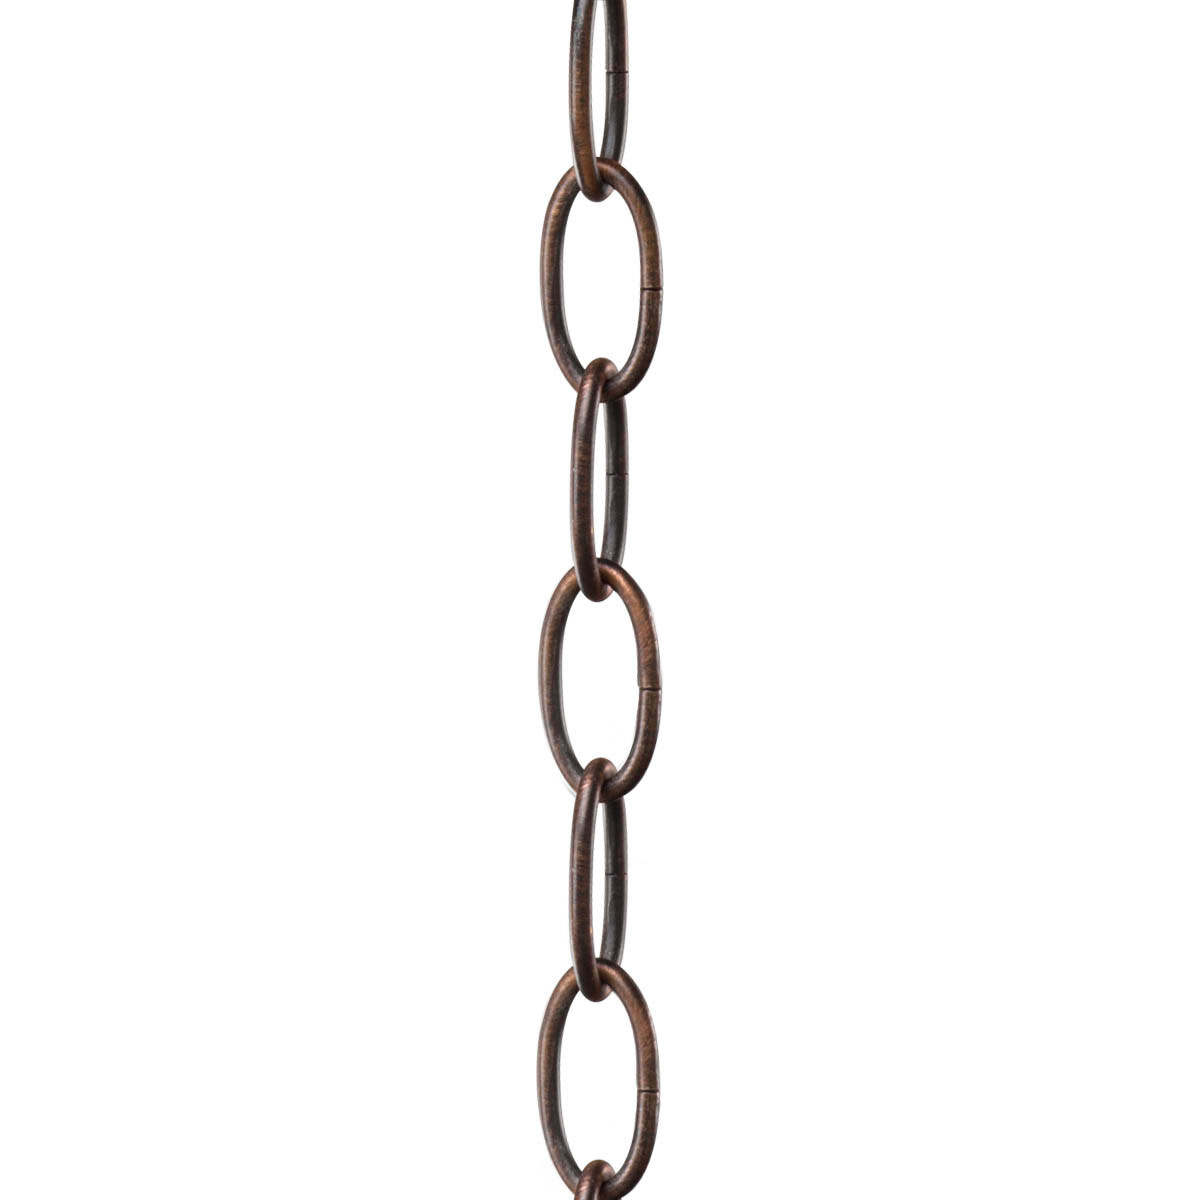 Ten feet of 9 gauge chain in Venetian Bronze finish. Solid chain permits installation of chain-hung fixtures on high ceilings. Maximum fixture weight 50 lbs.